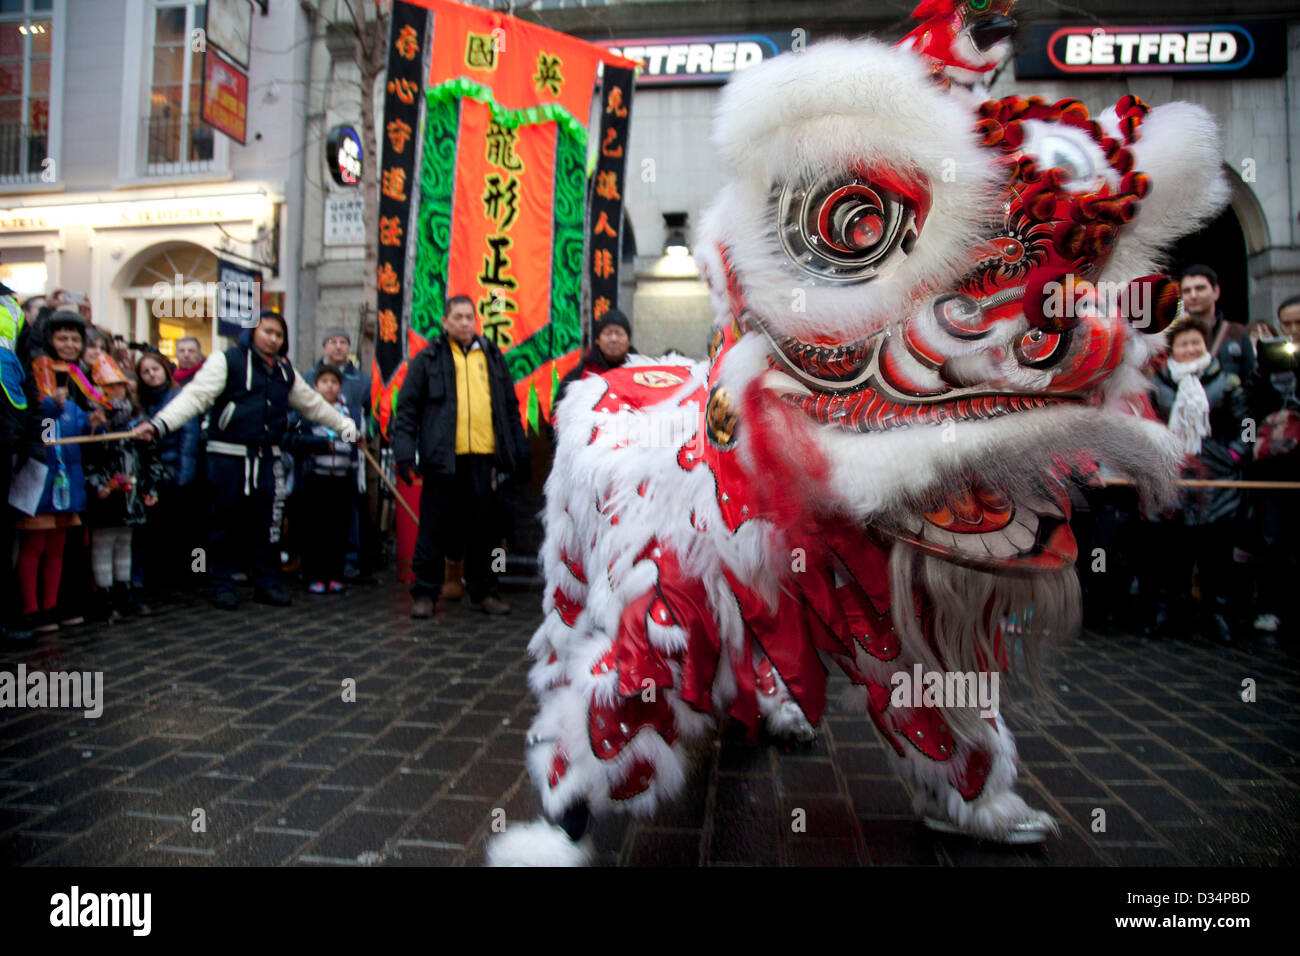 London, UK. Saturday 9th February 2013. To celebrate the Chinese New Year of the Snake, a dragon dance takes place on Gerrard Street in London's Chinatown. Local community come out in celebration as the dragon visits different restaurants to bless them for a prosperous year ahead. Credit:  Michael Kemp / Alamy Live News Stock Photo